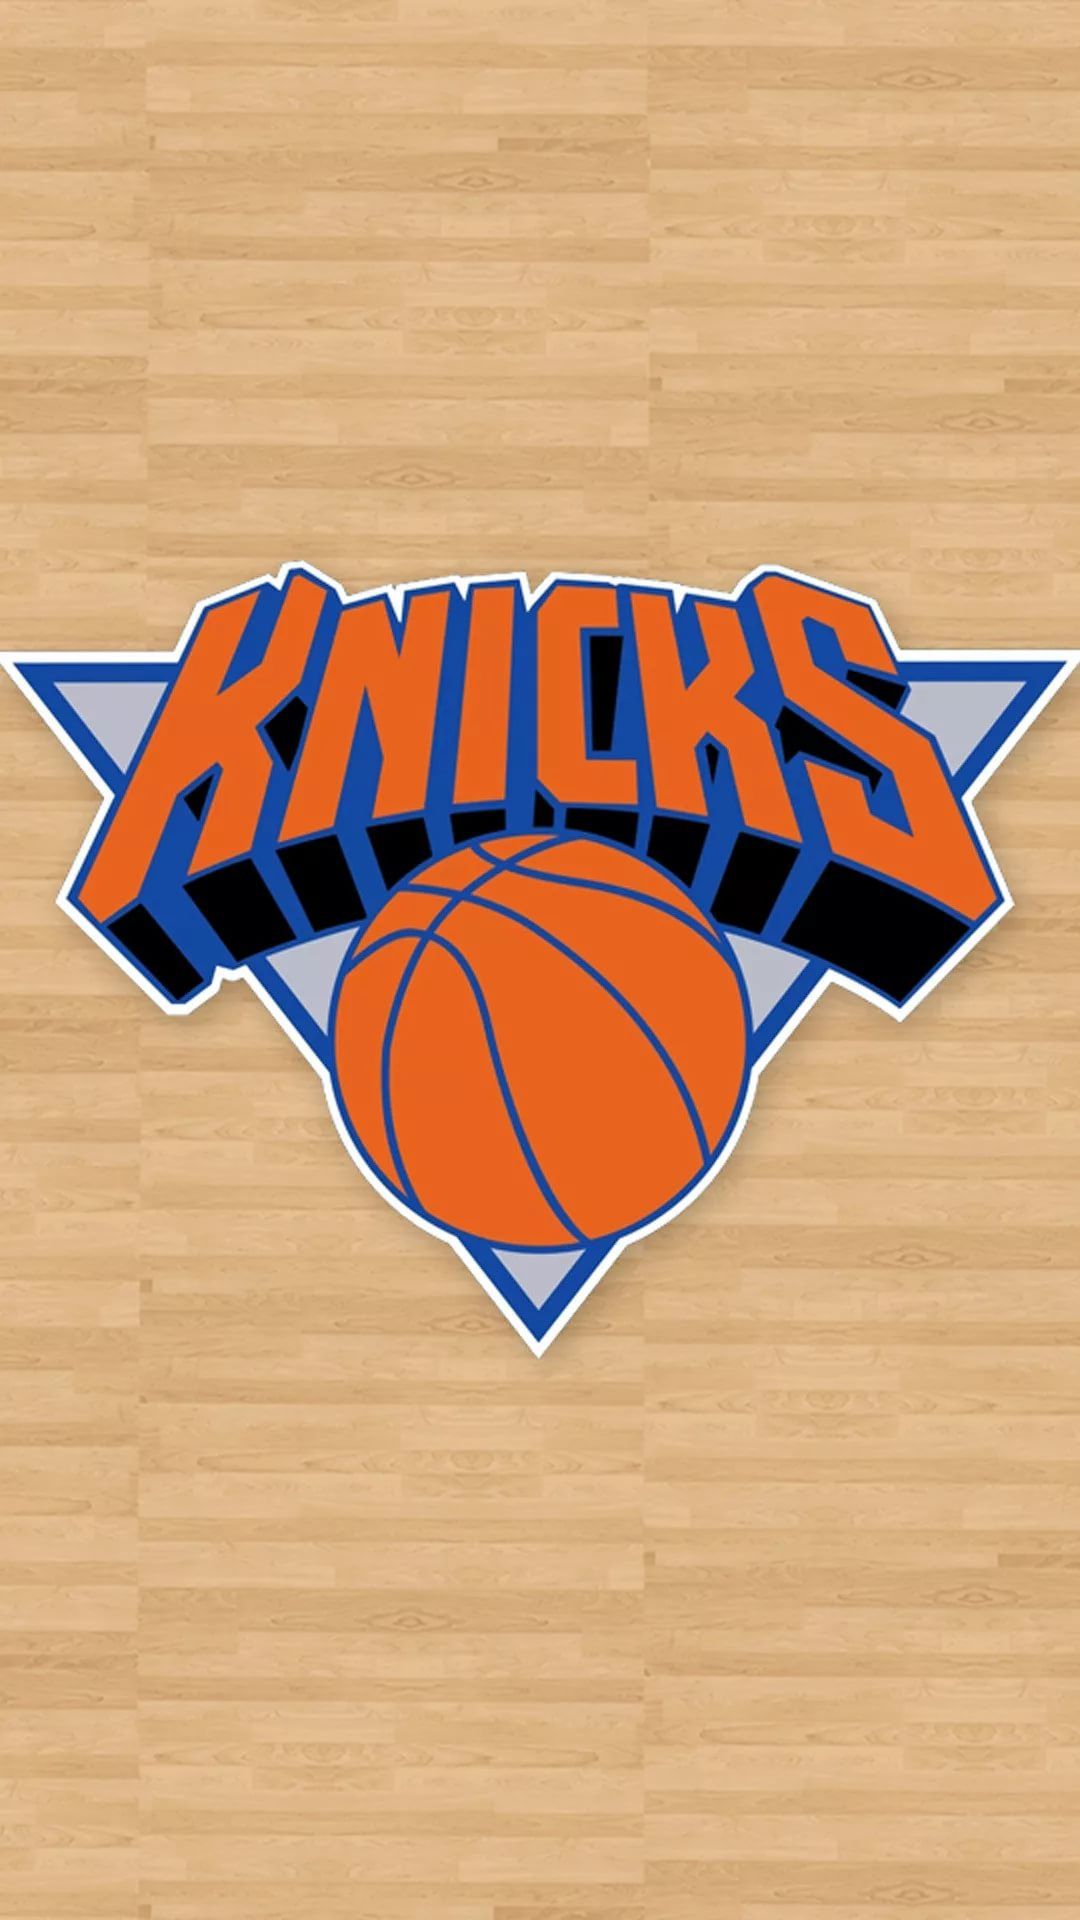 10 New York Knicks iPhone Wallpapers